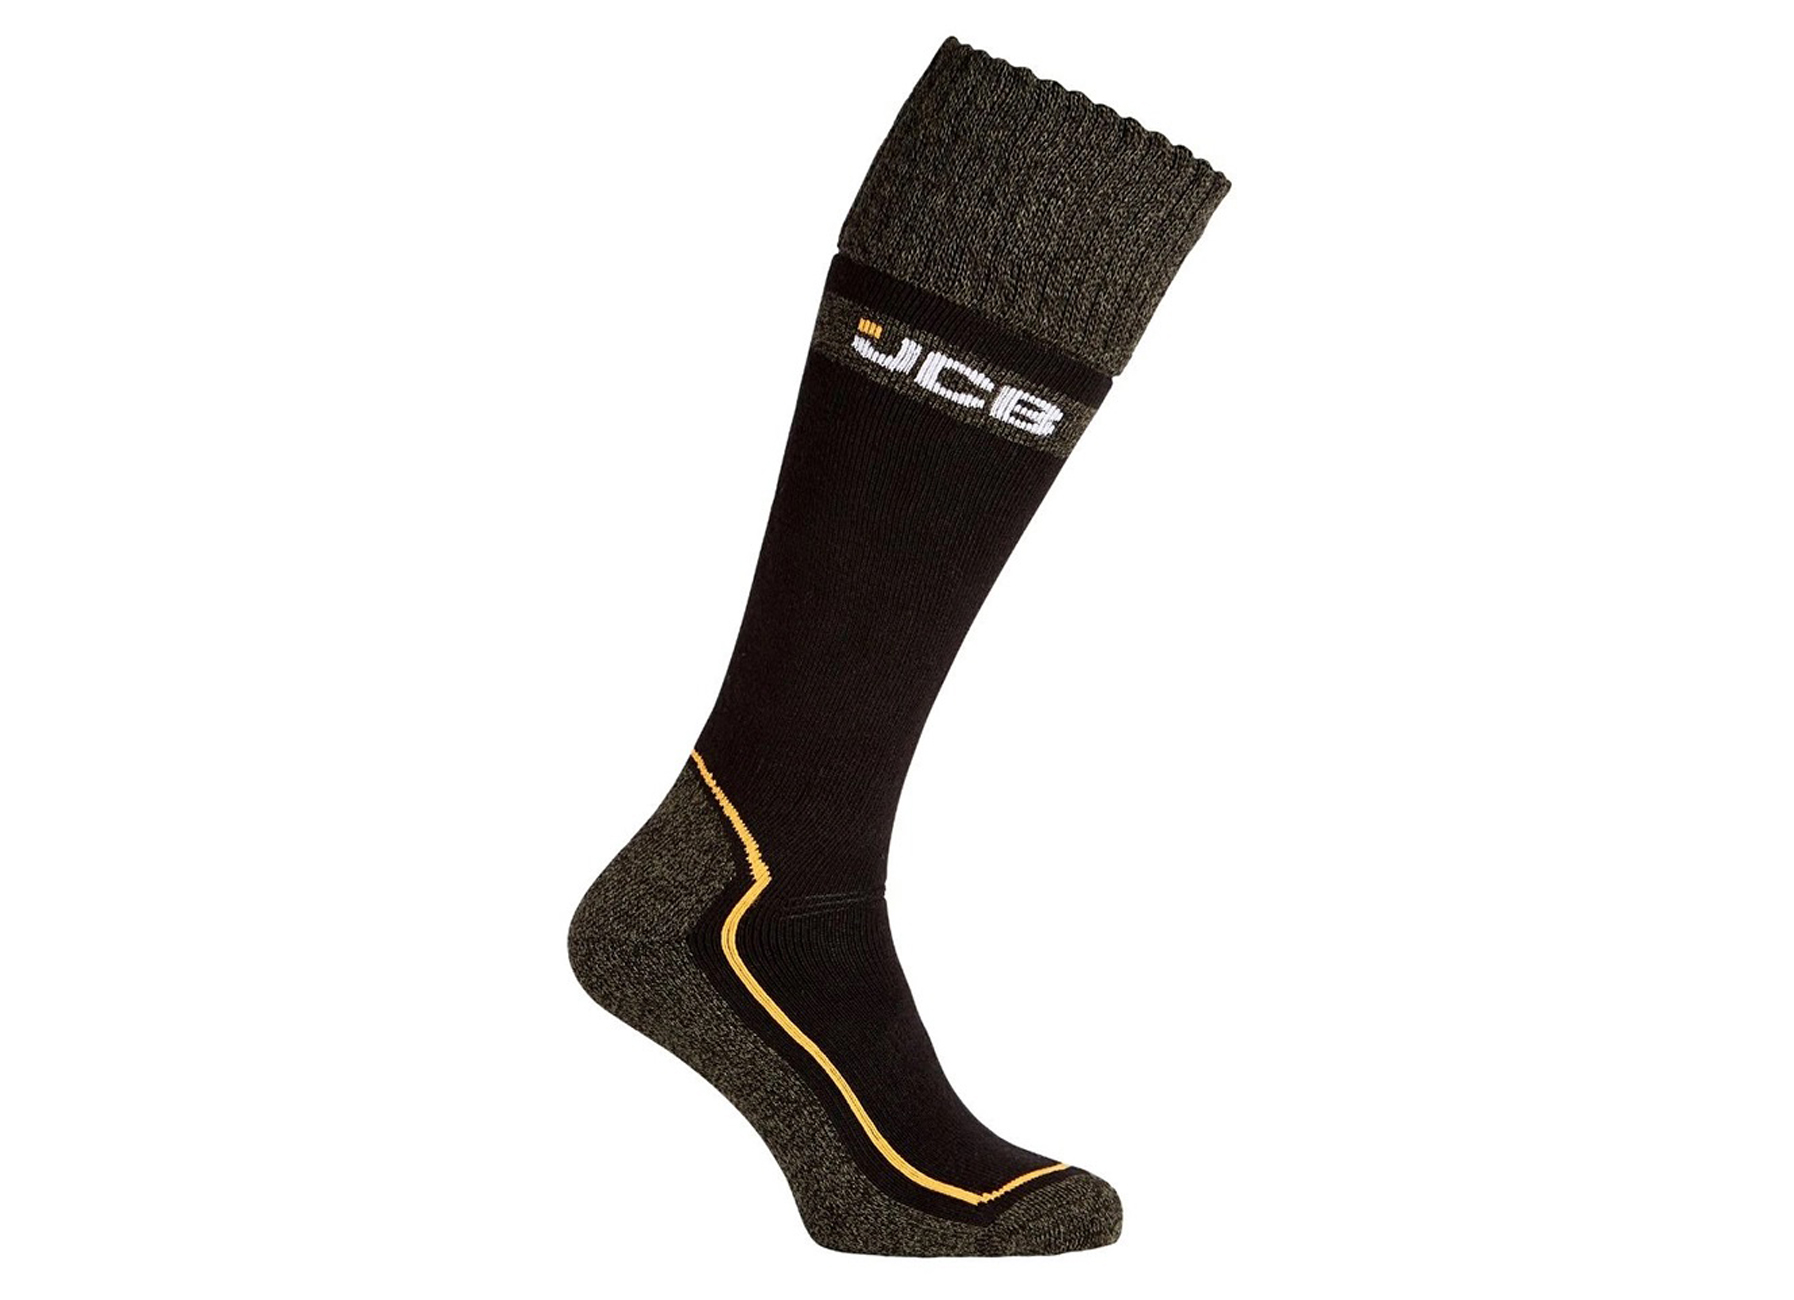 JCB CHAUSSETTES HIVER PRO TECH WELLY 39-43